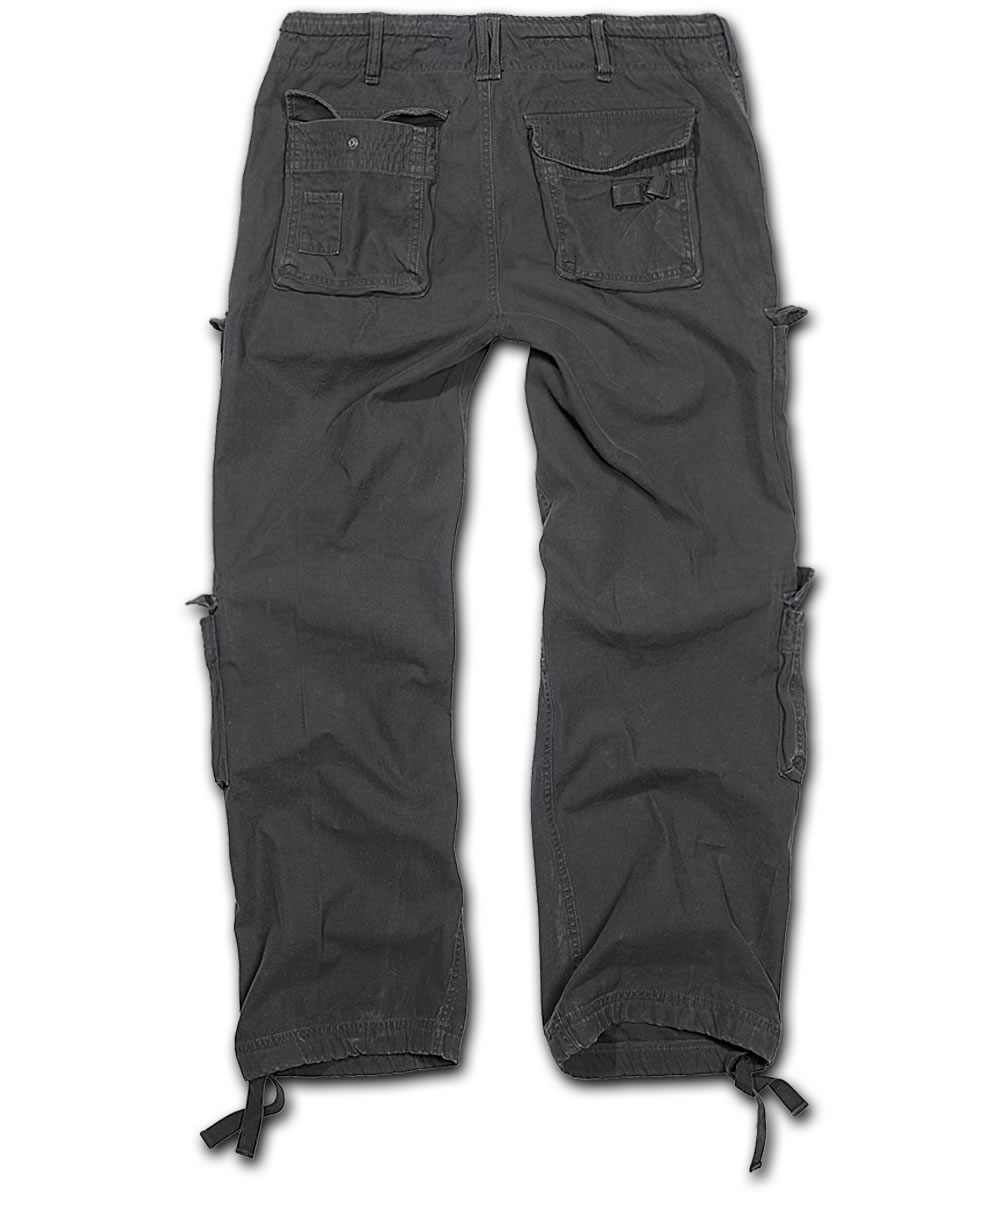 New Airborne Vintage Trousers